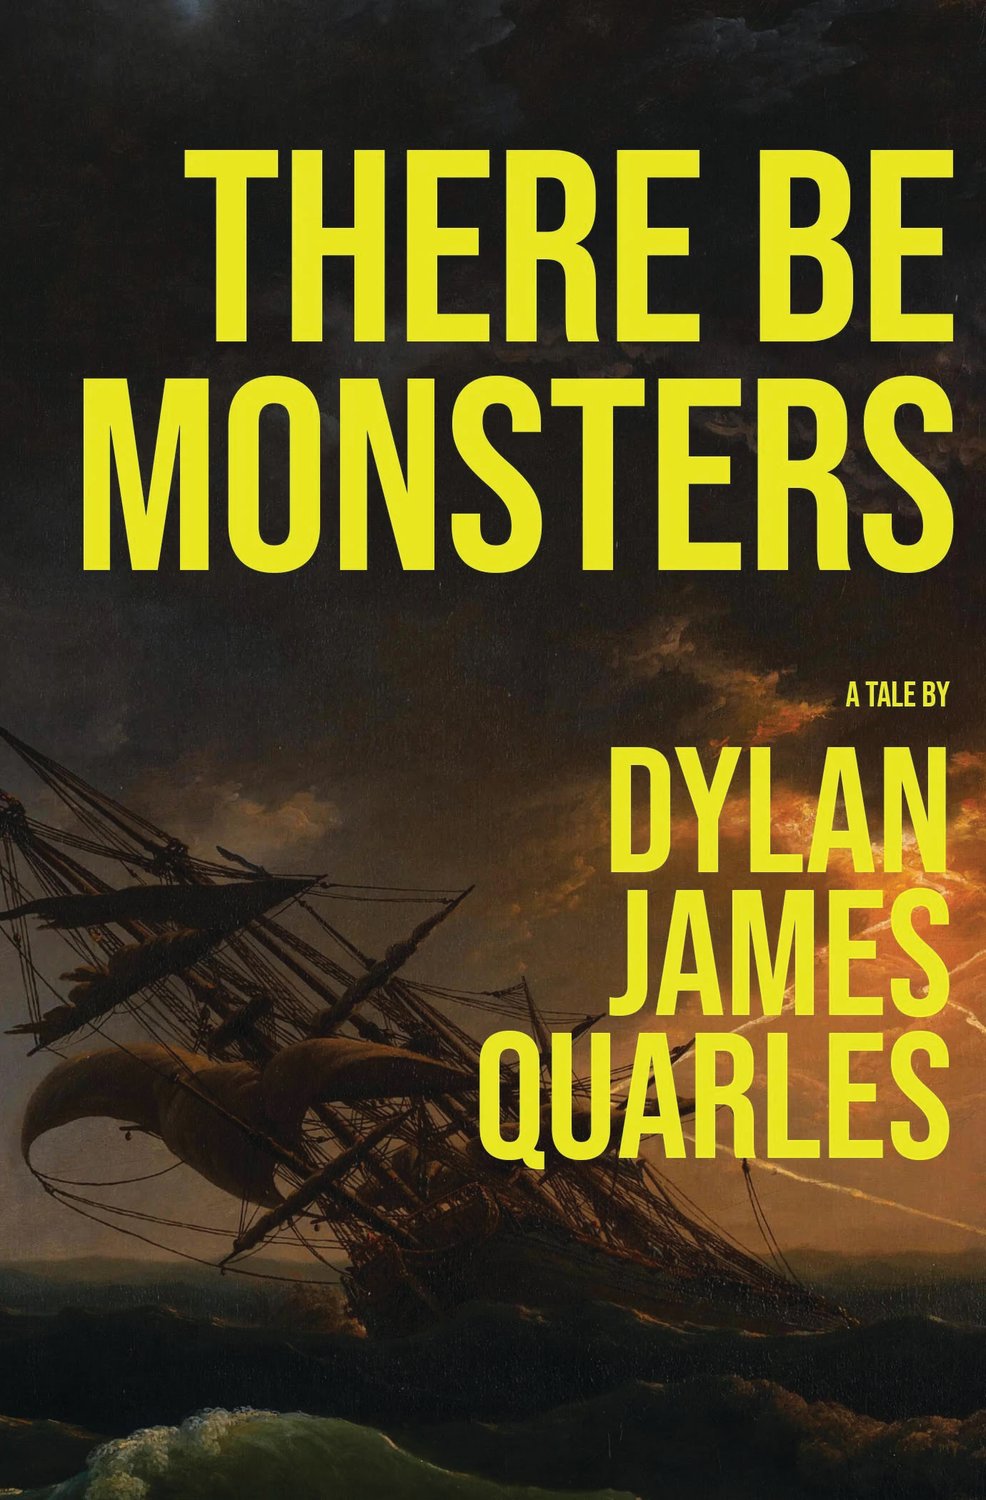 "There Be Monsters" is an adventure-filled sci-fi fantasy epic.